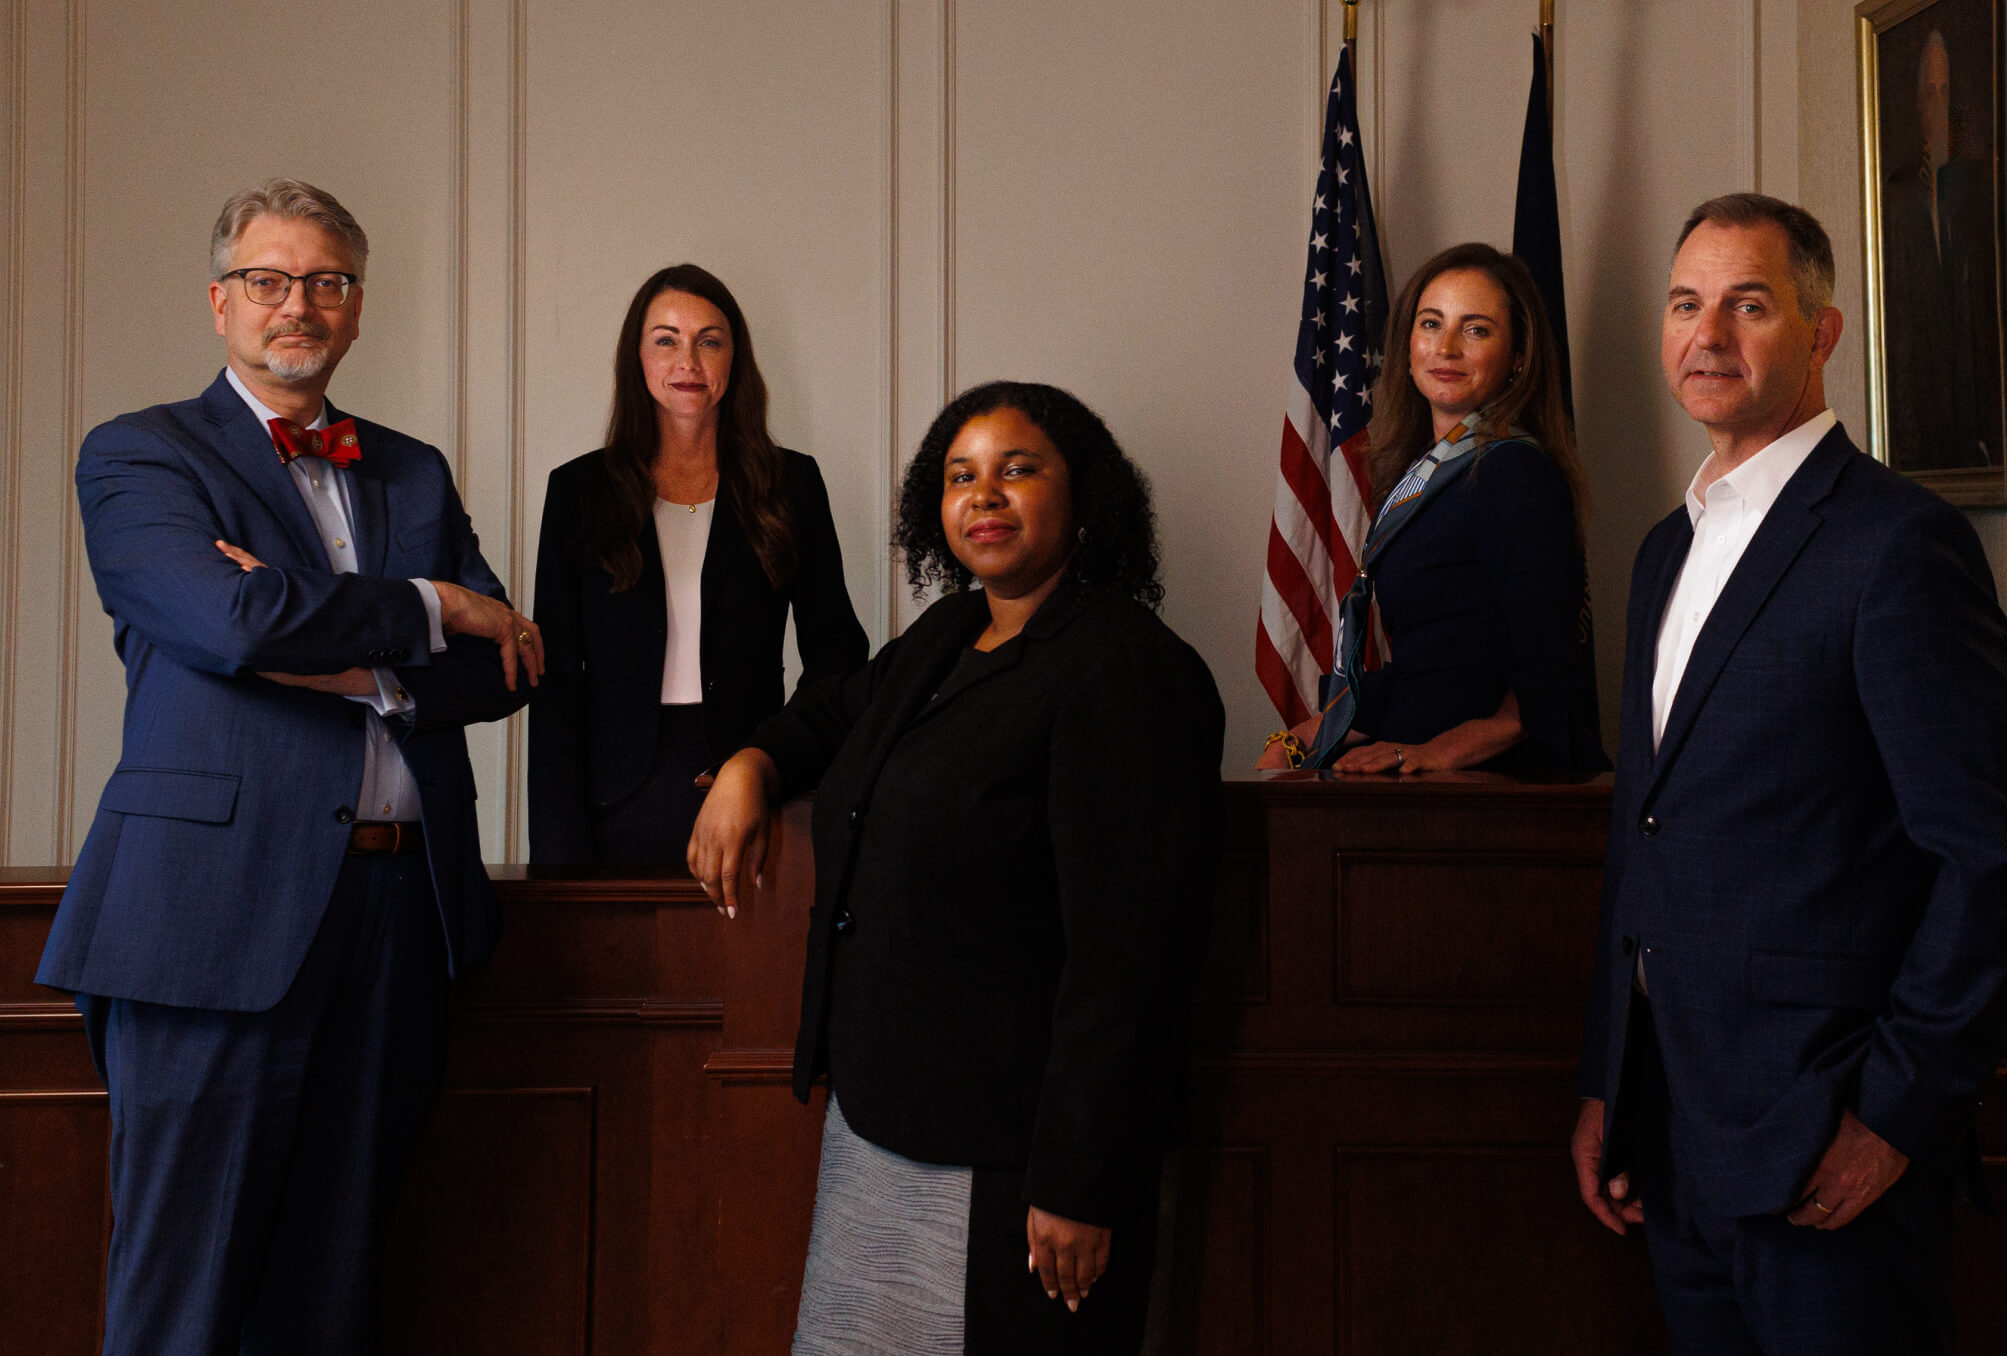 Five attorneys in a room, posing for a photograph.